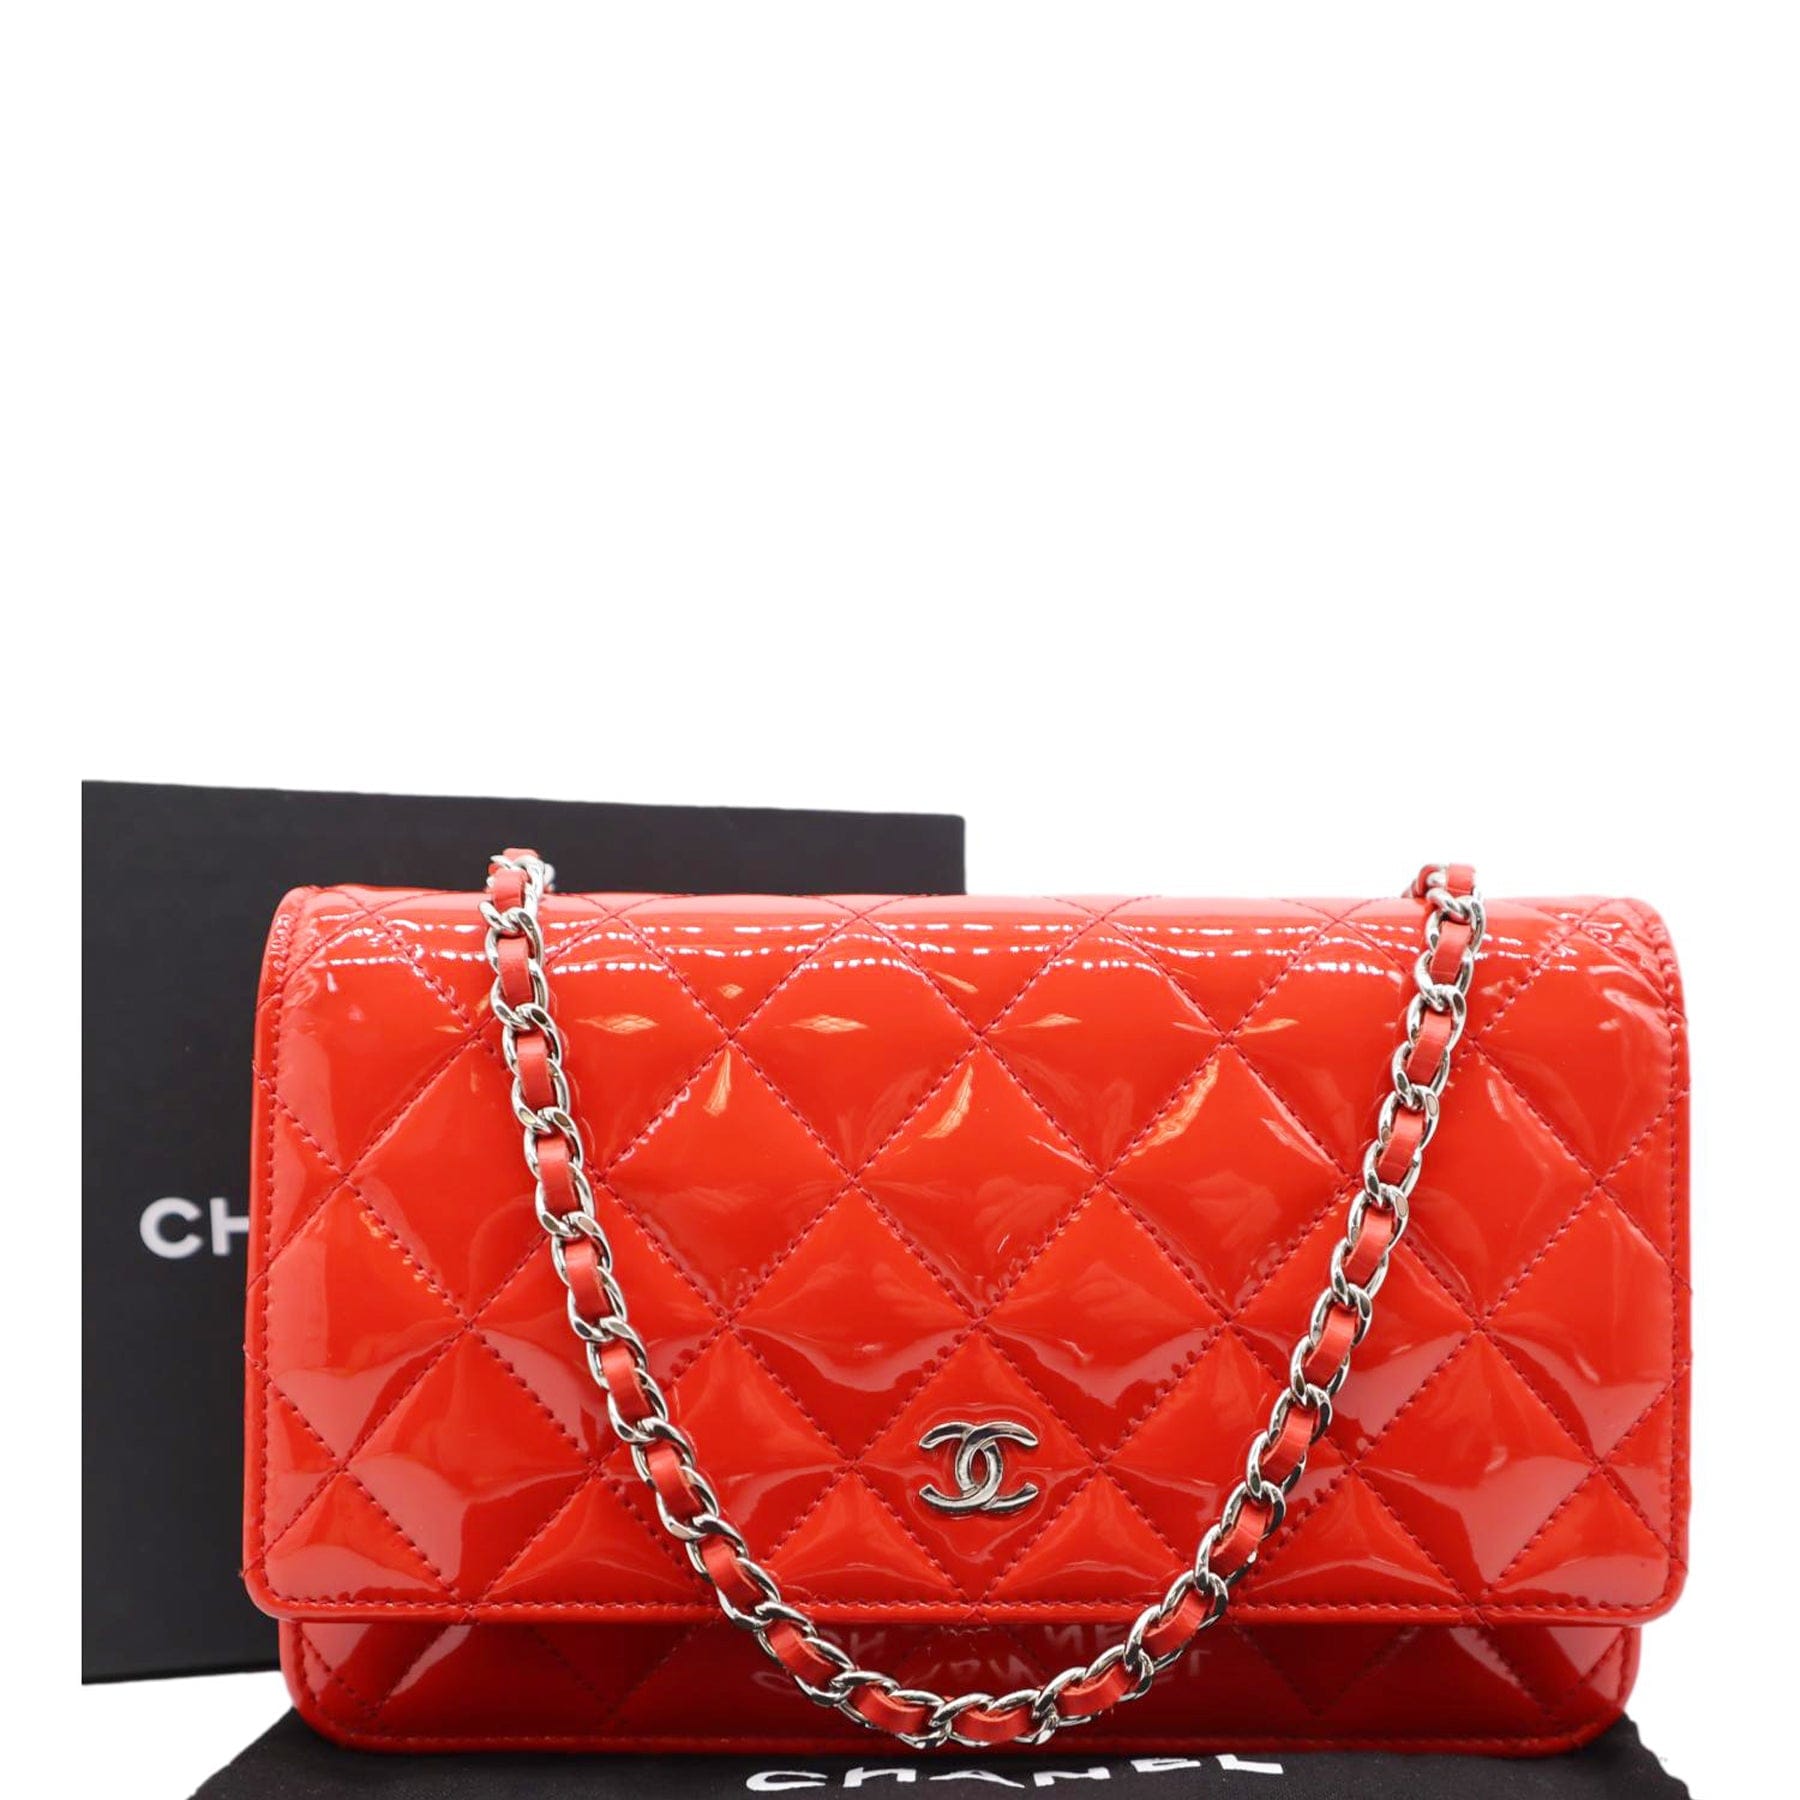 Statement leather handbag Chanel Red in Leather - 38220584